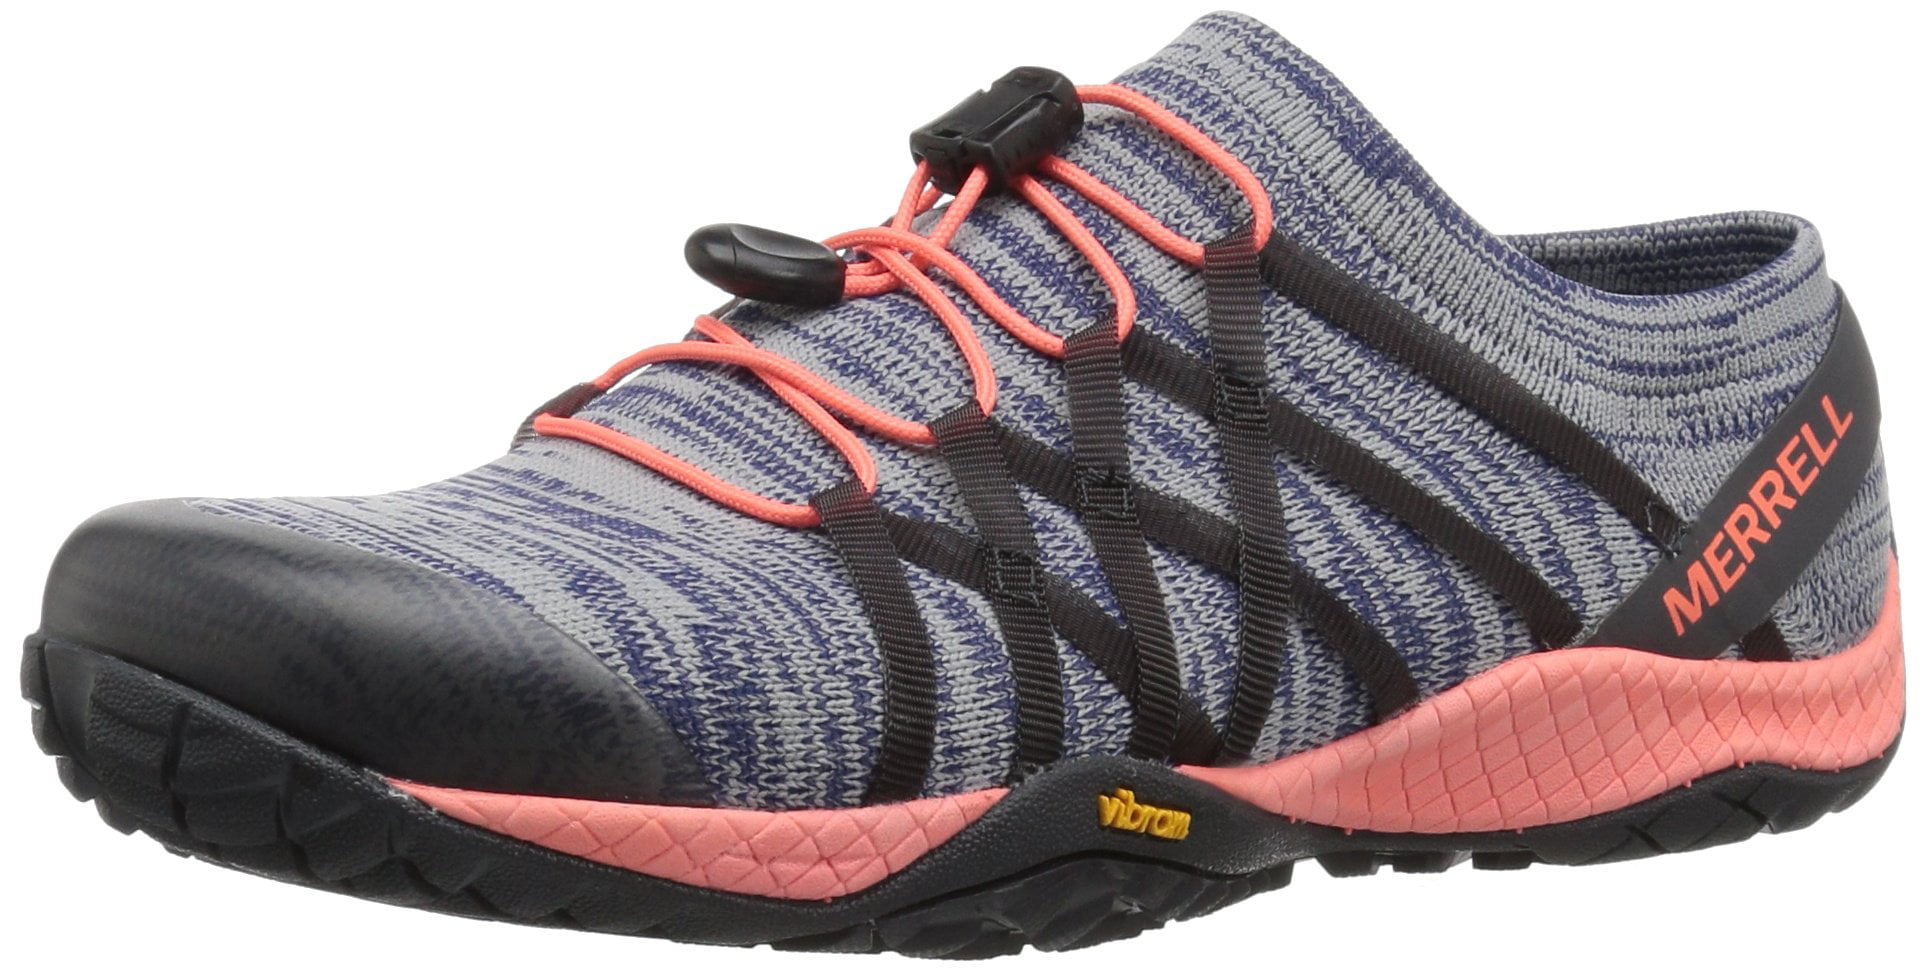 Merrell Mens Trail Glove 4 Knit Running Shoes Trainers Sneakers Navy Blue Sports 